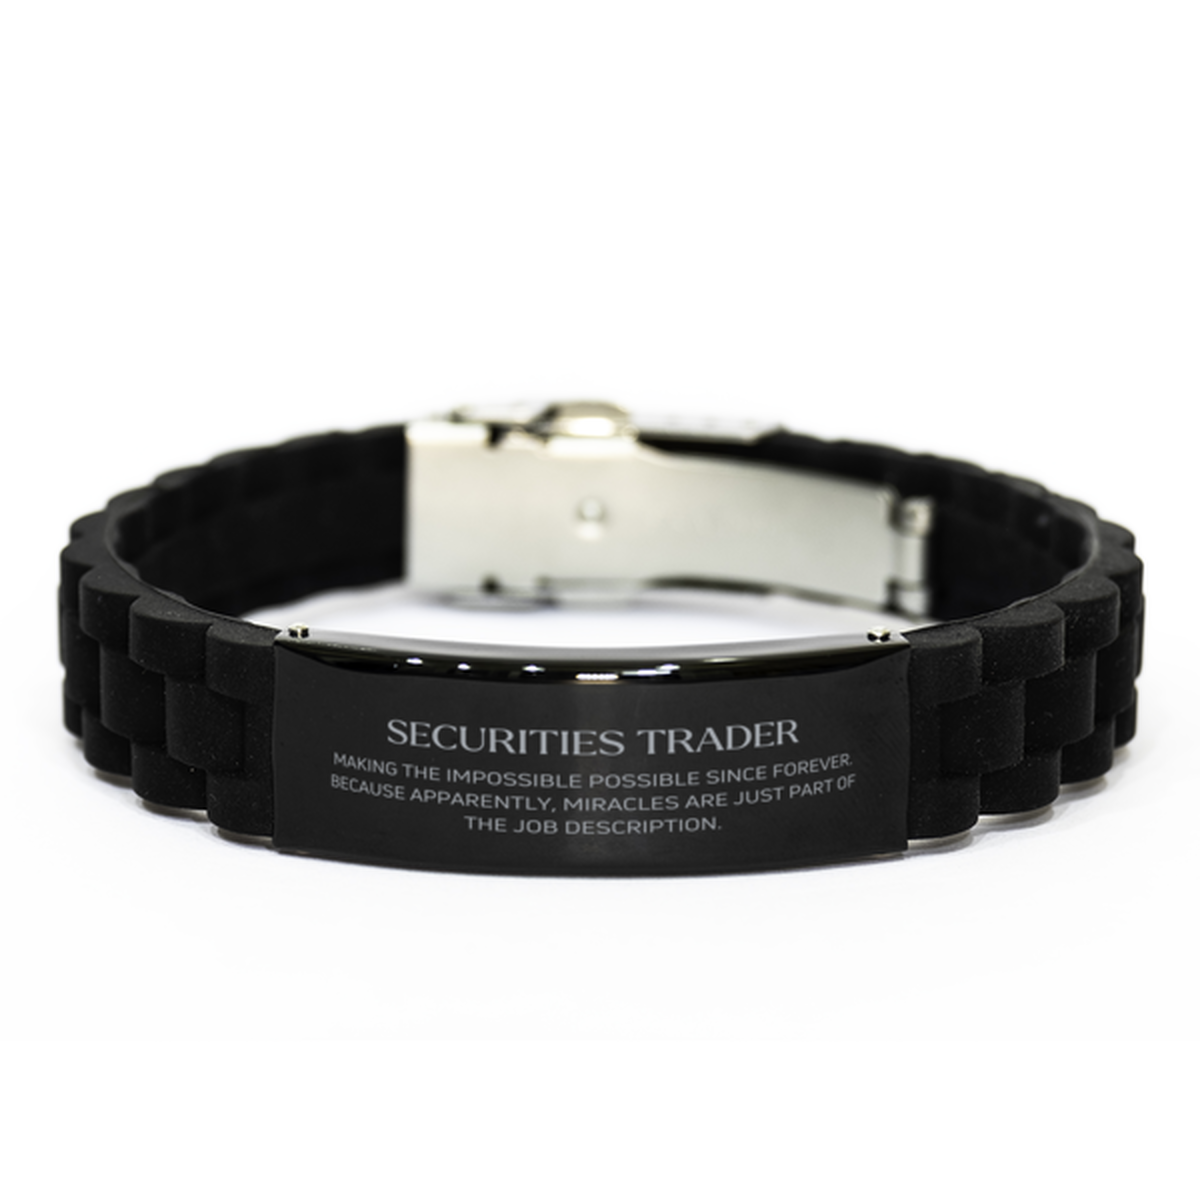 Funny Securities Trader Gifts, Miracles are just part of the job description, Inspirational Birthday Black Glidelock Clasp Bracelet For Securities Trader, Men, Women, Coworkers, Friends, Boss